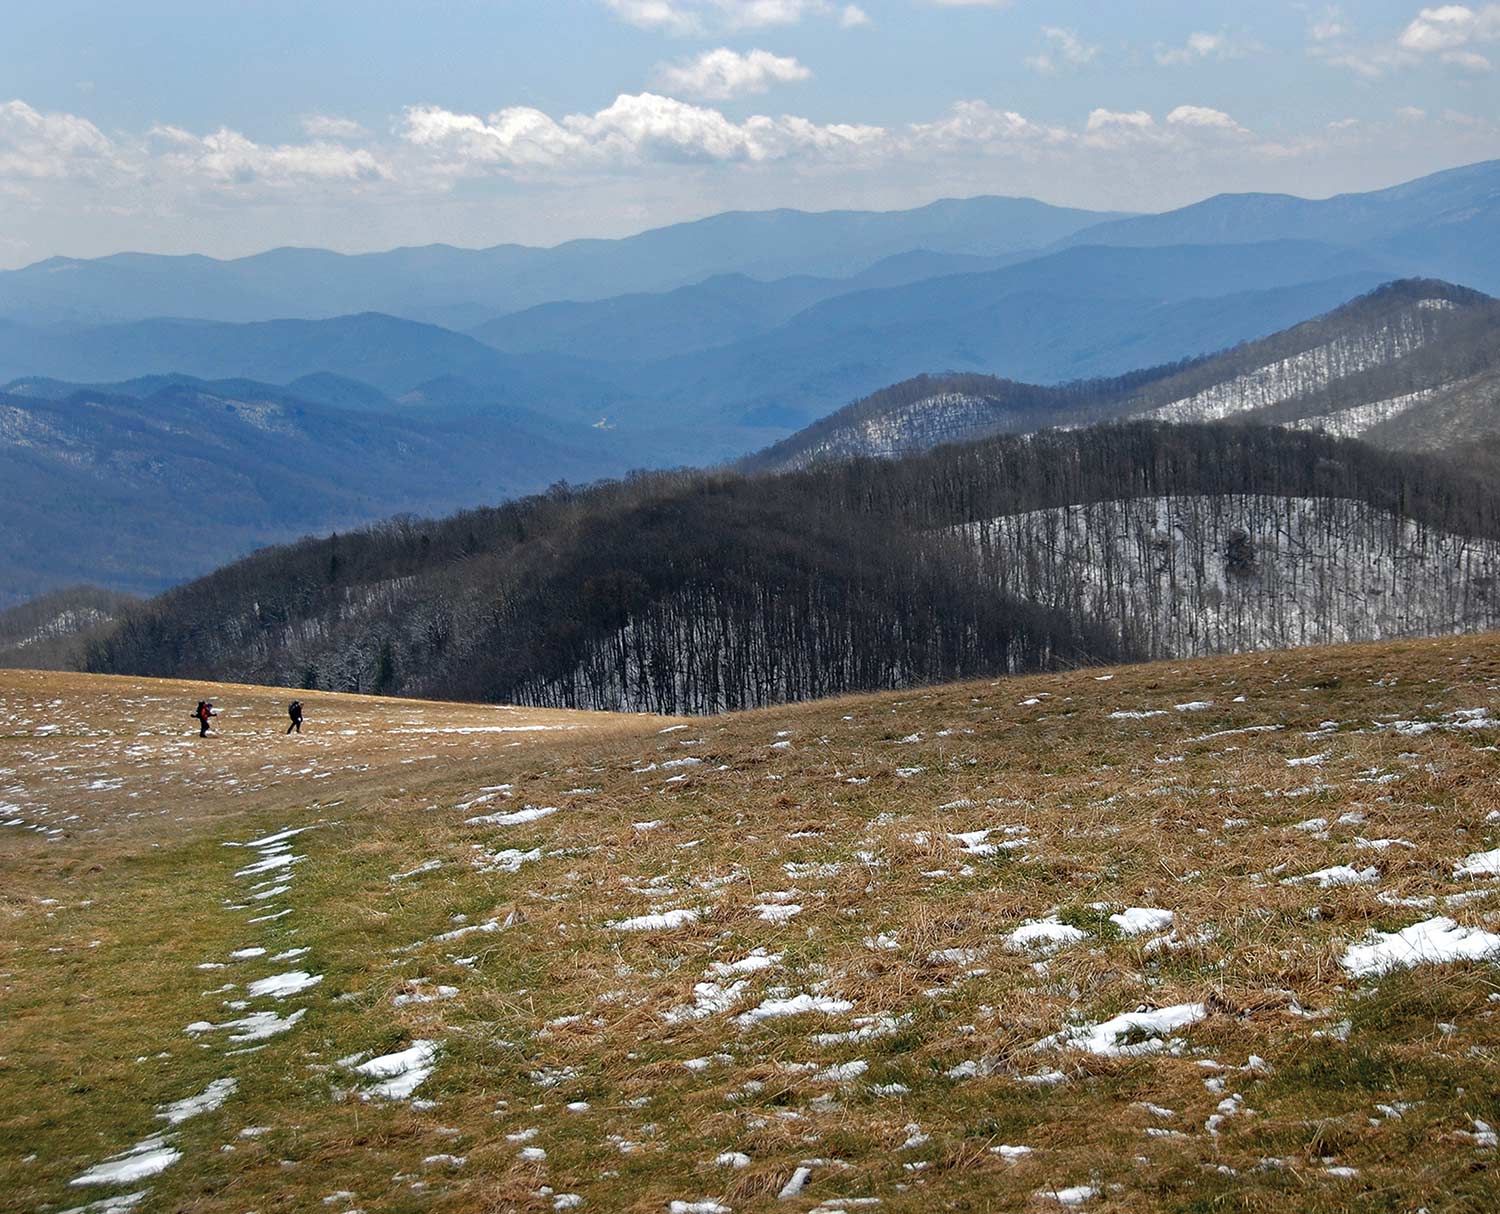 A.T. hikers on the  North Carolina/Tennessee balds